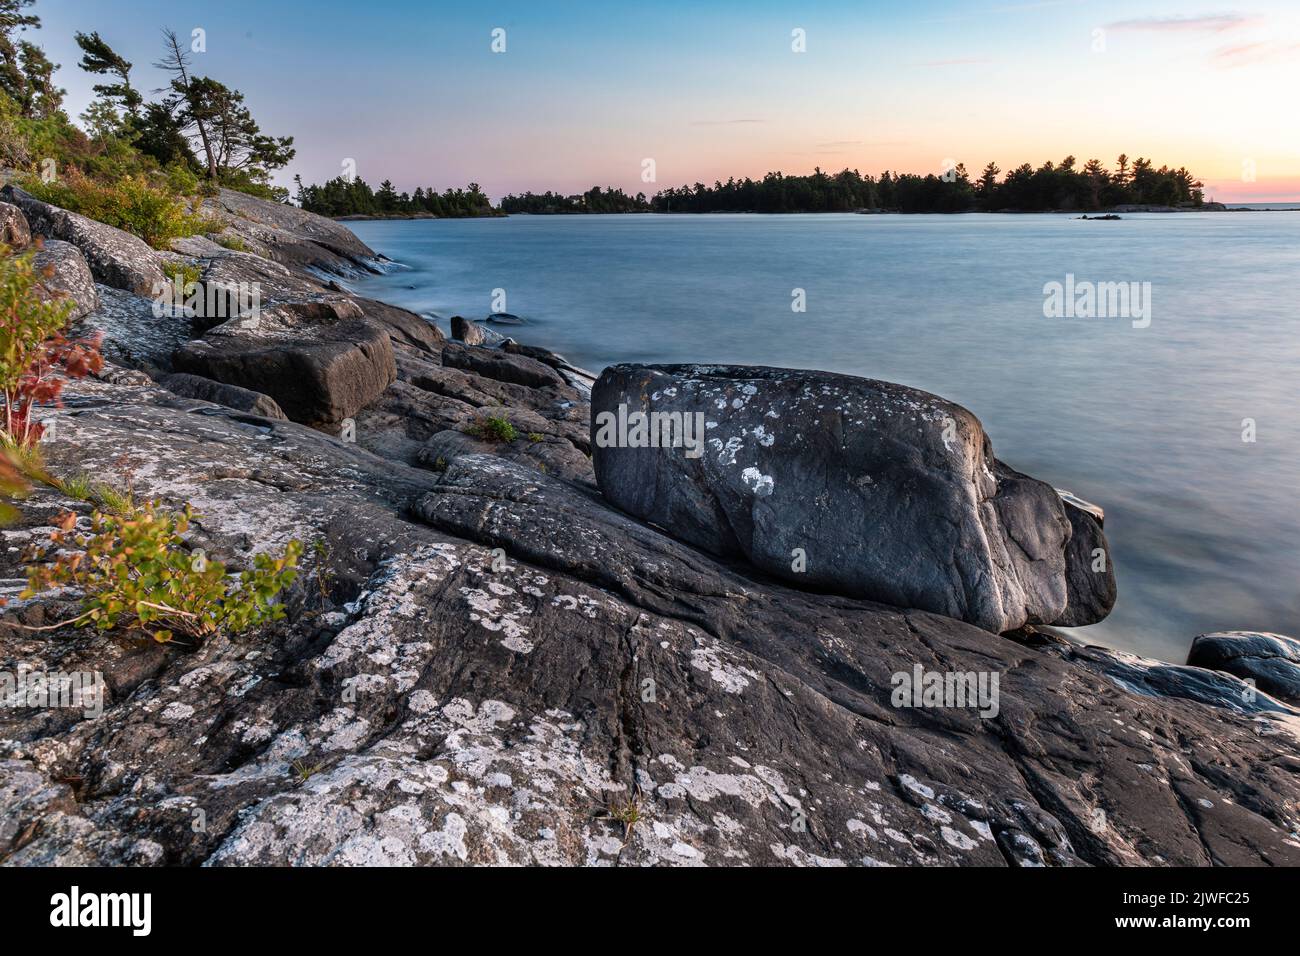 Shoreline of an island among the 30,000 island archipelago on the eastern side of the Georgian Bay in Ontario, Canada. Stock Photo